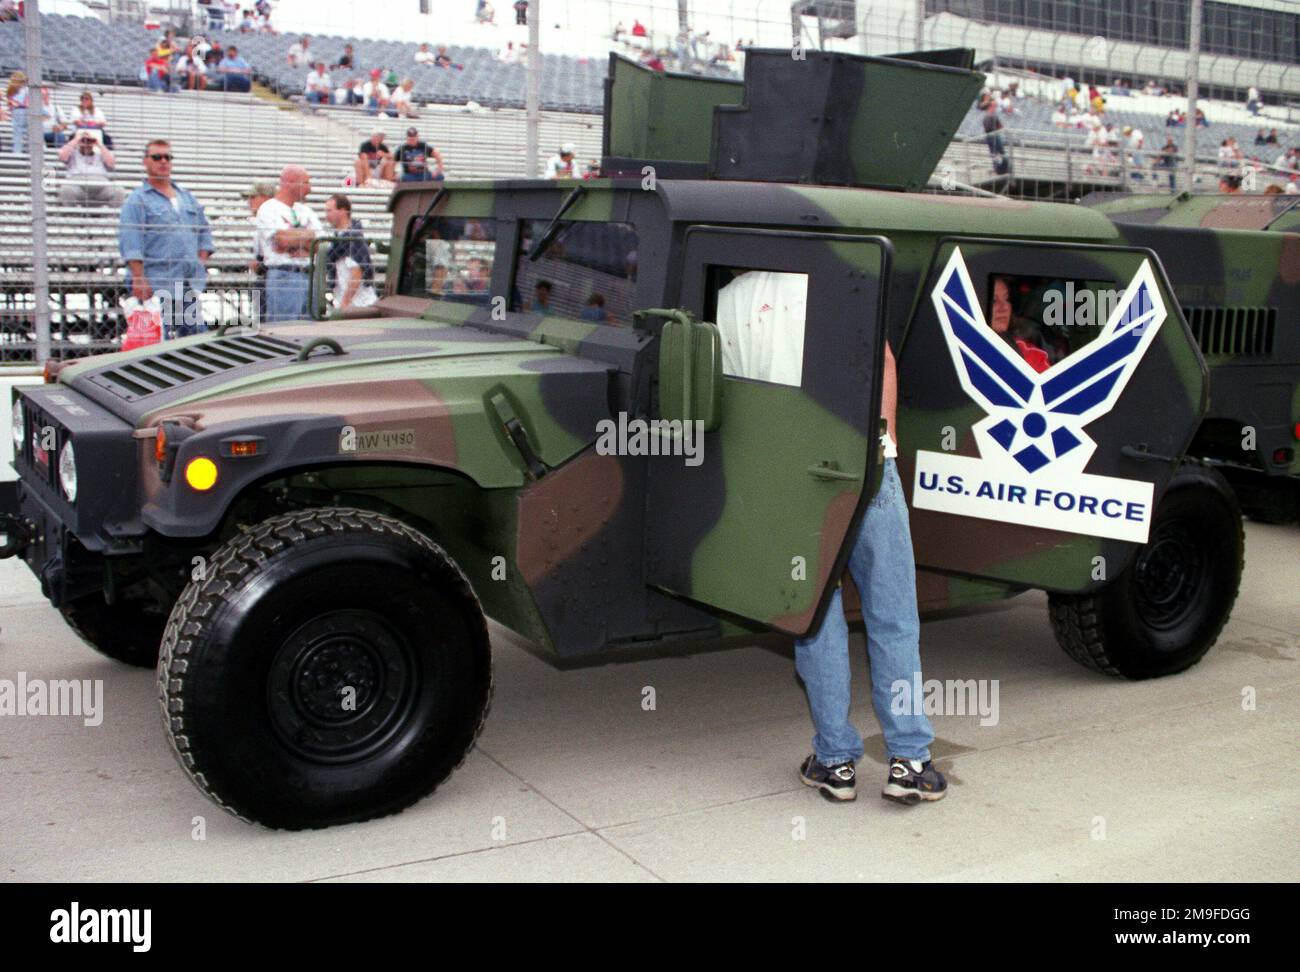 Members of the 436th Security Forces Squadron, Dover Air Force Base, Delaware, display their High-Mobility Multipurpose Wheeled Vehicles (HMMWV), which led the lead lap before the start of the MBNA 400 held at Dover Downs International Speedway, Delaware, on September 24, 2000. Base: Dover State: Delaware (DE) Country: United States Of America (USA) Stock Photo